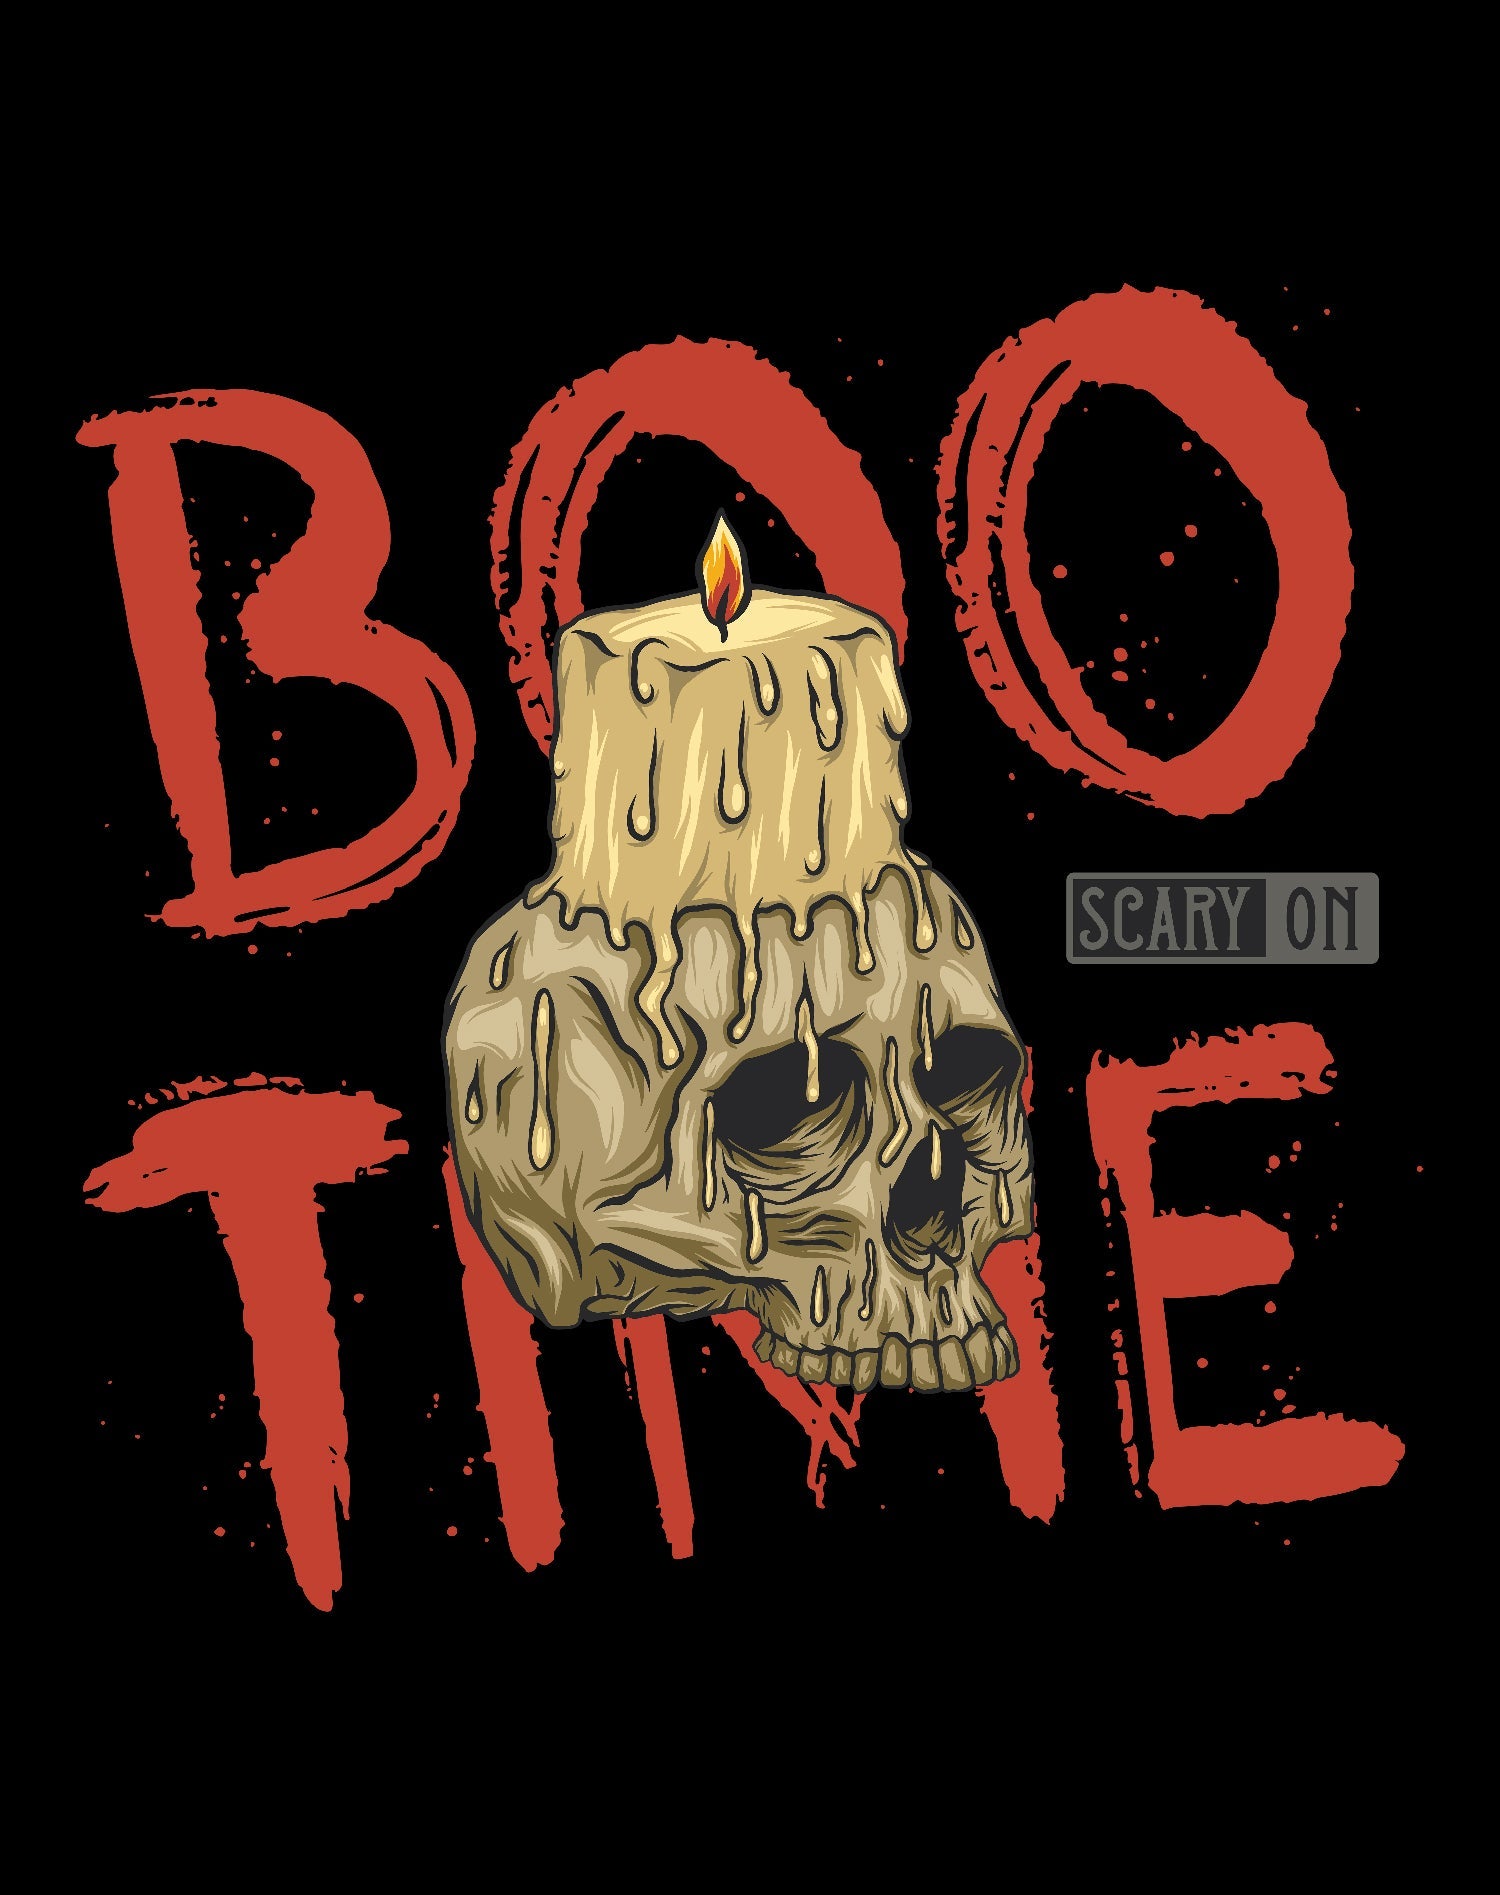 Halloween Horror Boo Time Skull Candle Scary Retro 80s Official Women's T-shirt